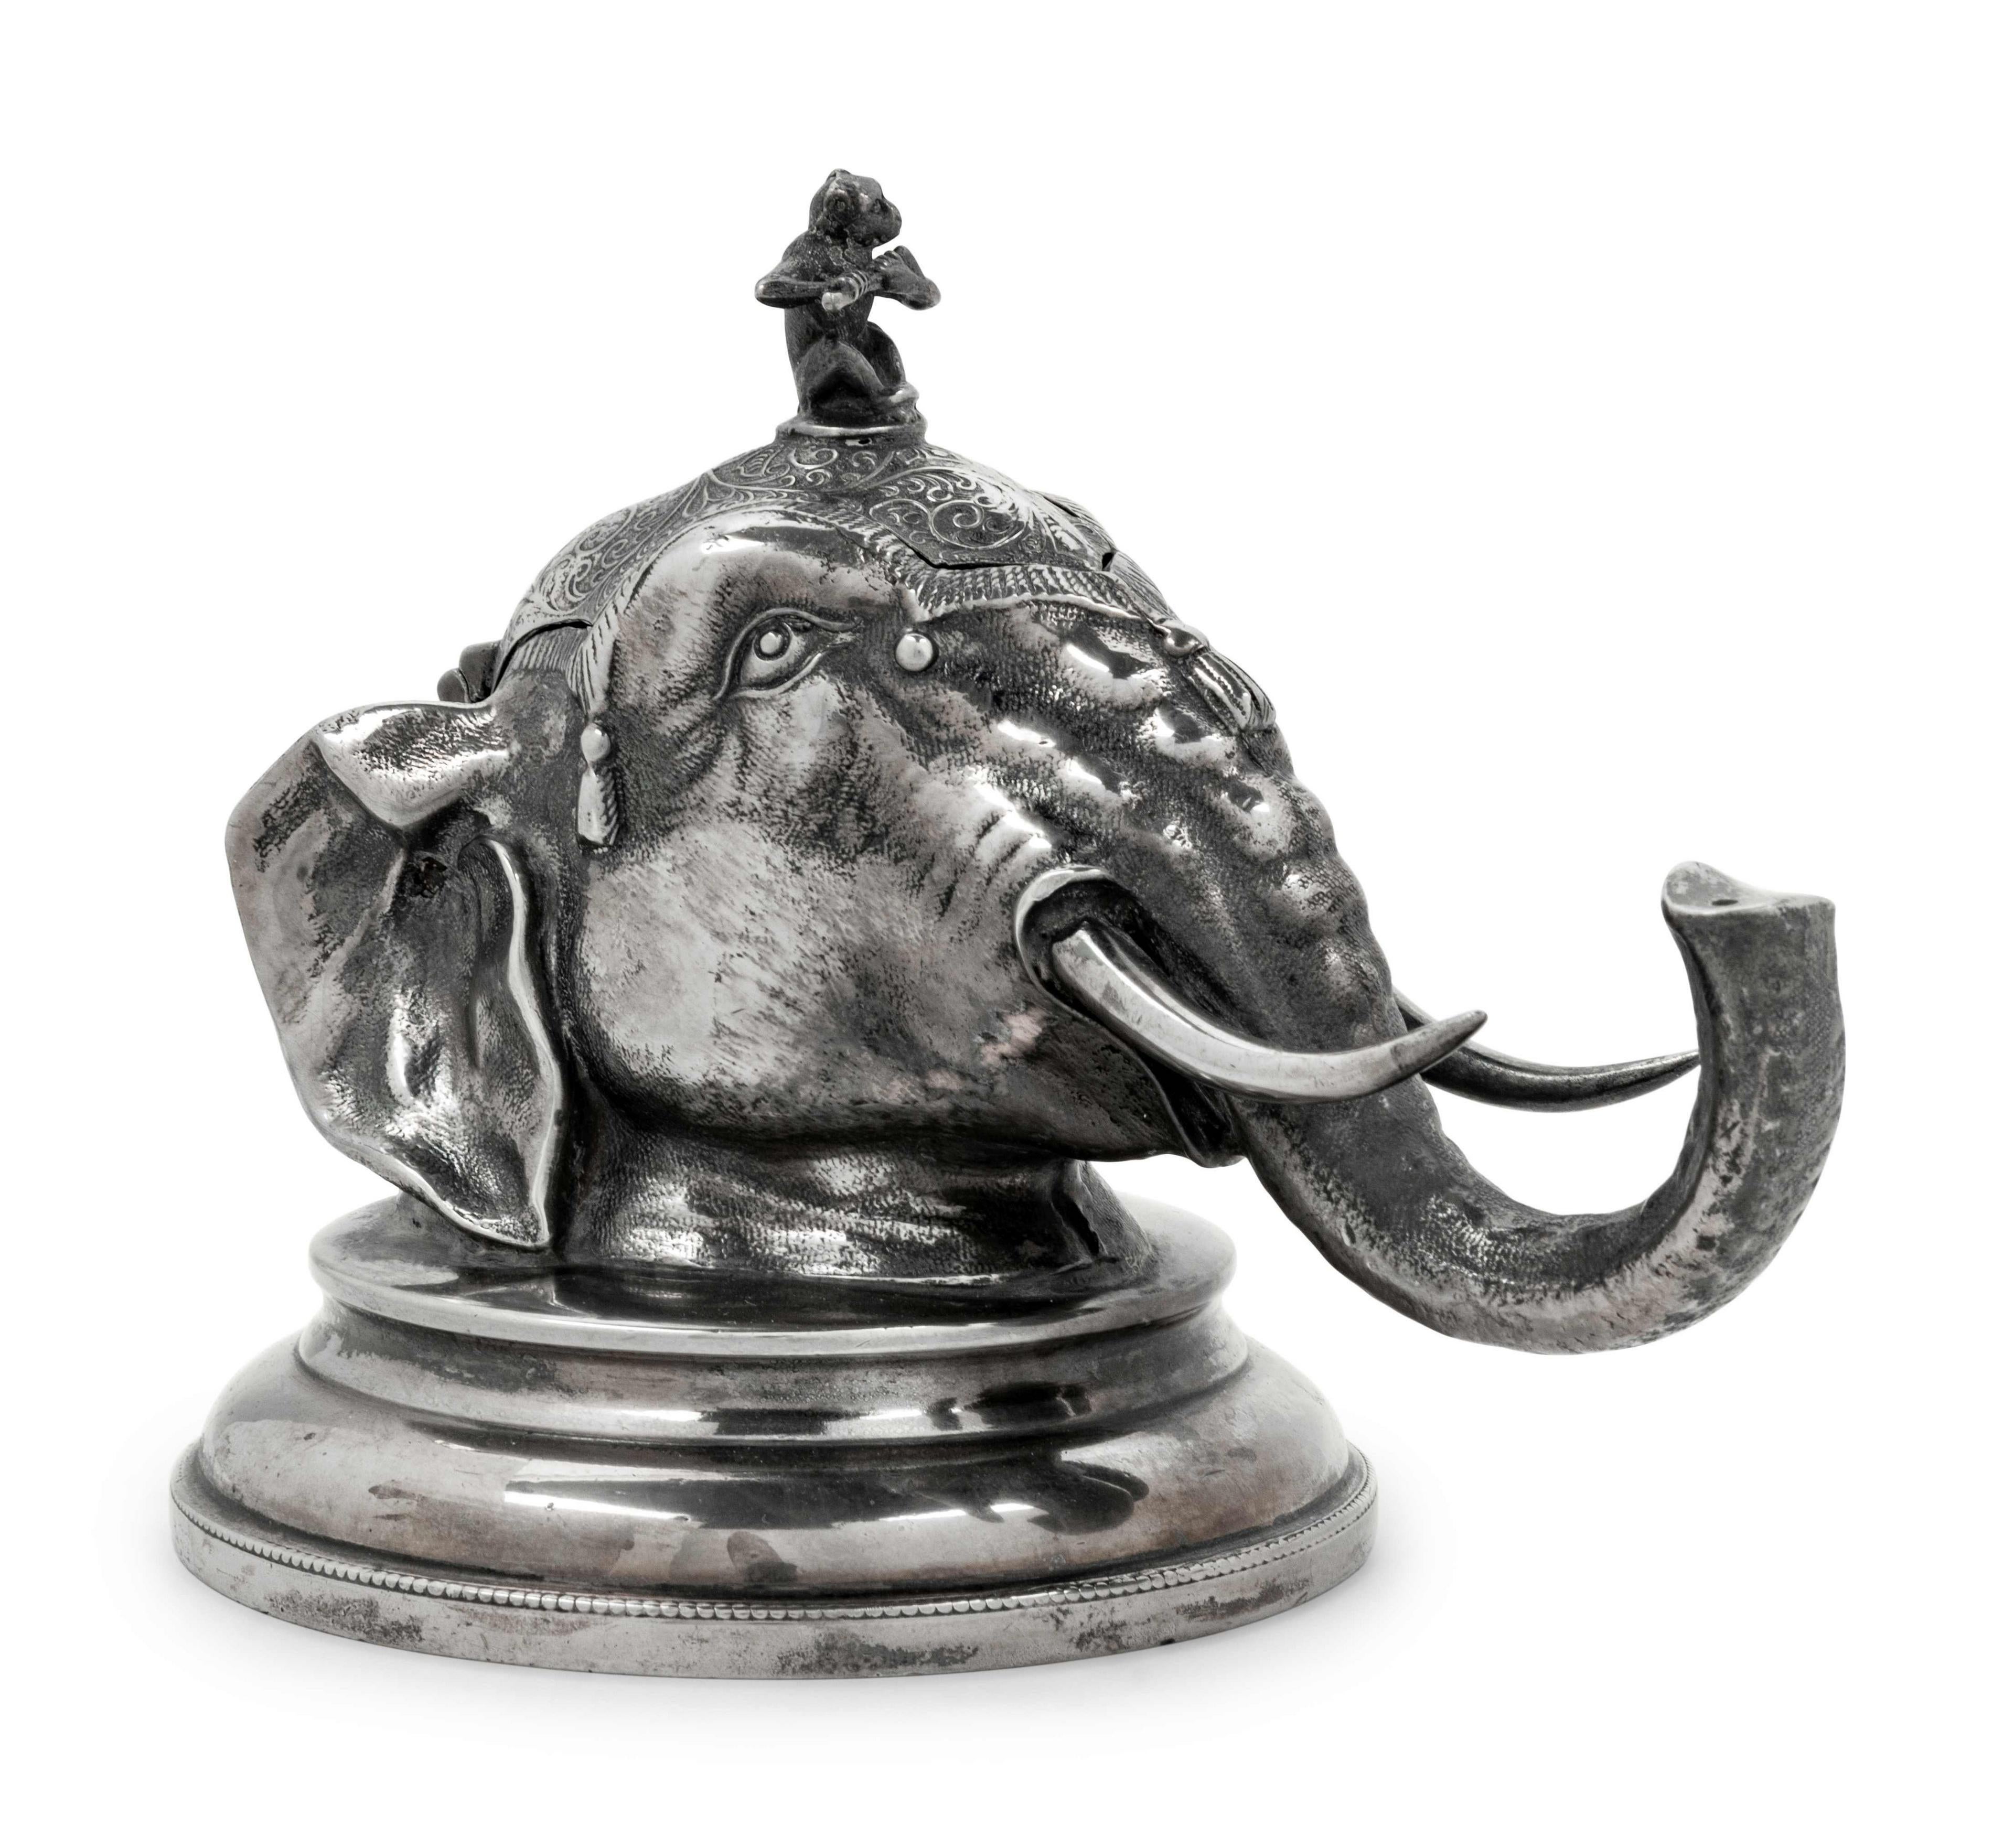 An English silver plate zoomorphic ink well, depicting an elephants head with a finial of a monkey playing a flute. Porcelain interior container, late 19th-early 20th century.
Dimensions: Height 5 1/2